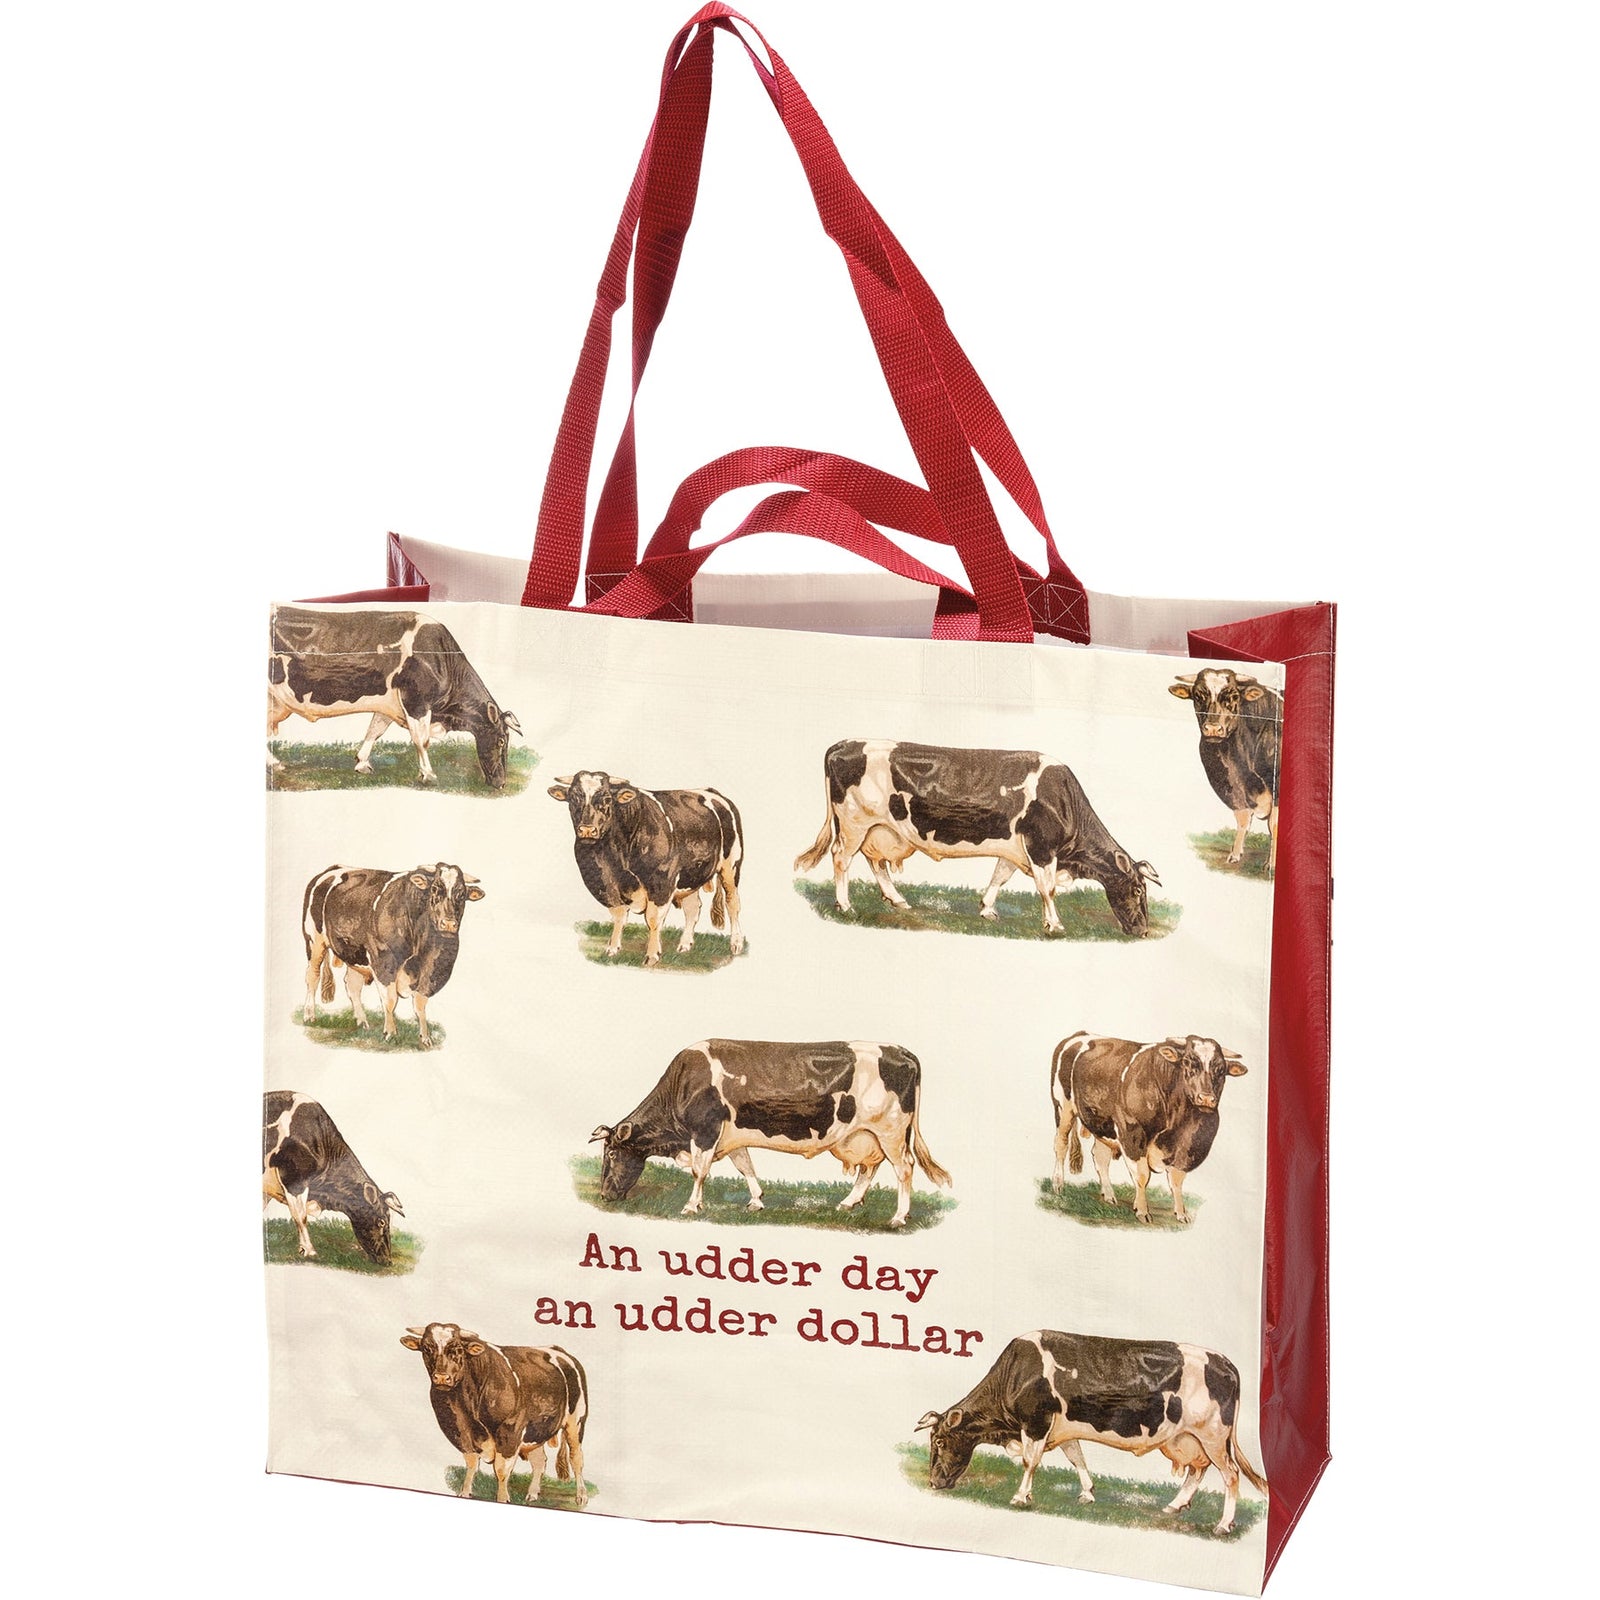 Rise & Shine Mother Cluckers Double-Sided Shopping Tote Bag